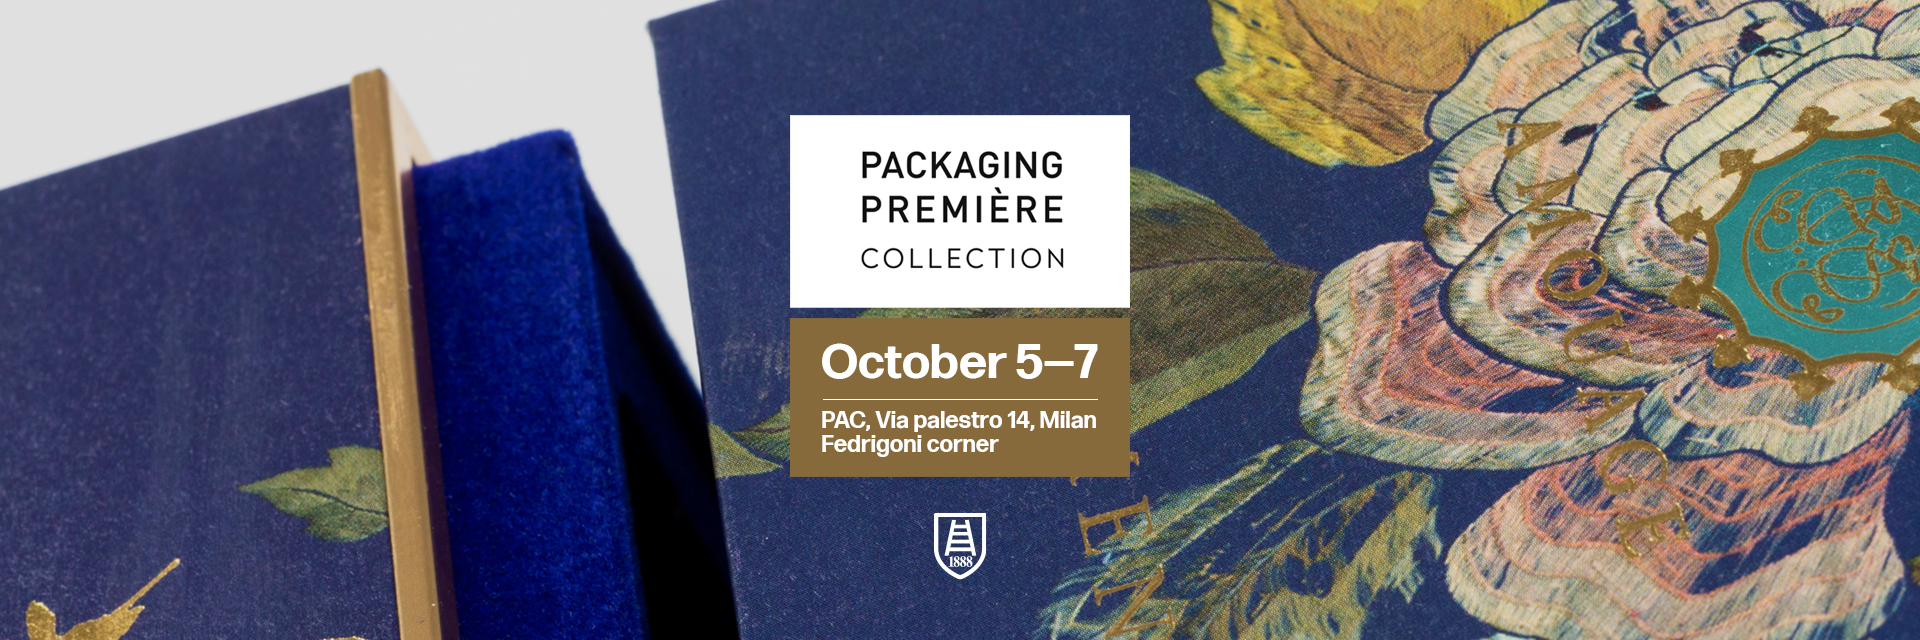 Visite-nos na Packaging Première Collection<!--Visit us at Packaging Premiere Collection-->